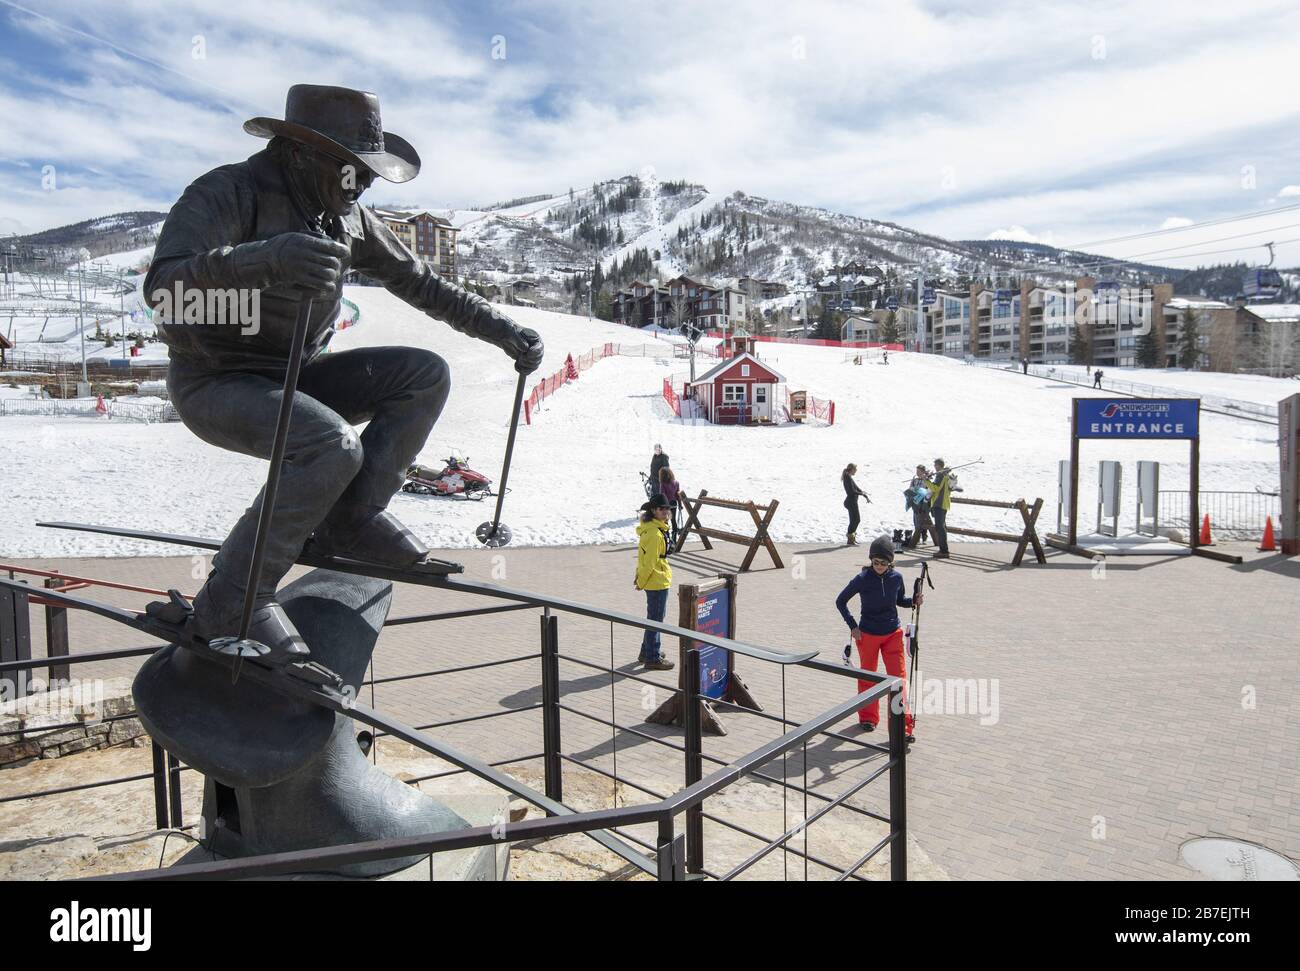 Steamboat Springs, United States. 15th Mar, 2020. A statute of legendary skier Billy Kidd highlights the base of an empty Steamboat Springs Ski Resort, in Steamboat Springs, Colorado on Sunday, March 15,